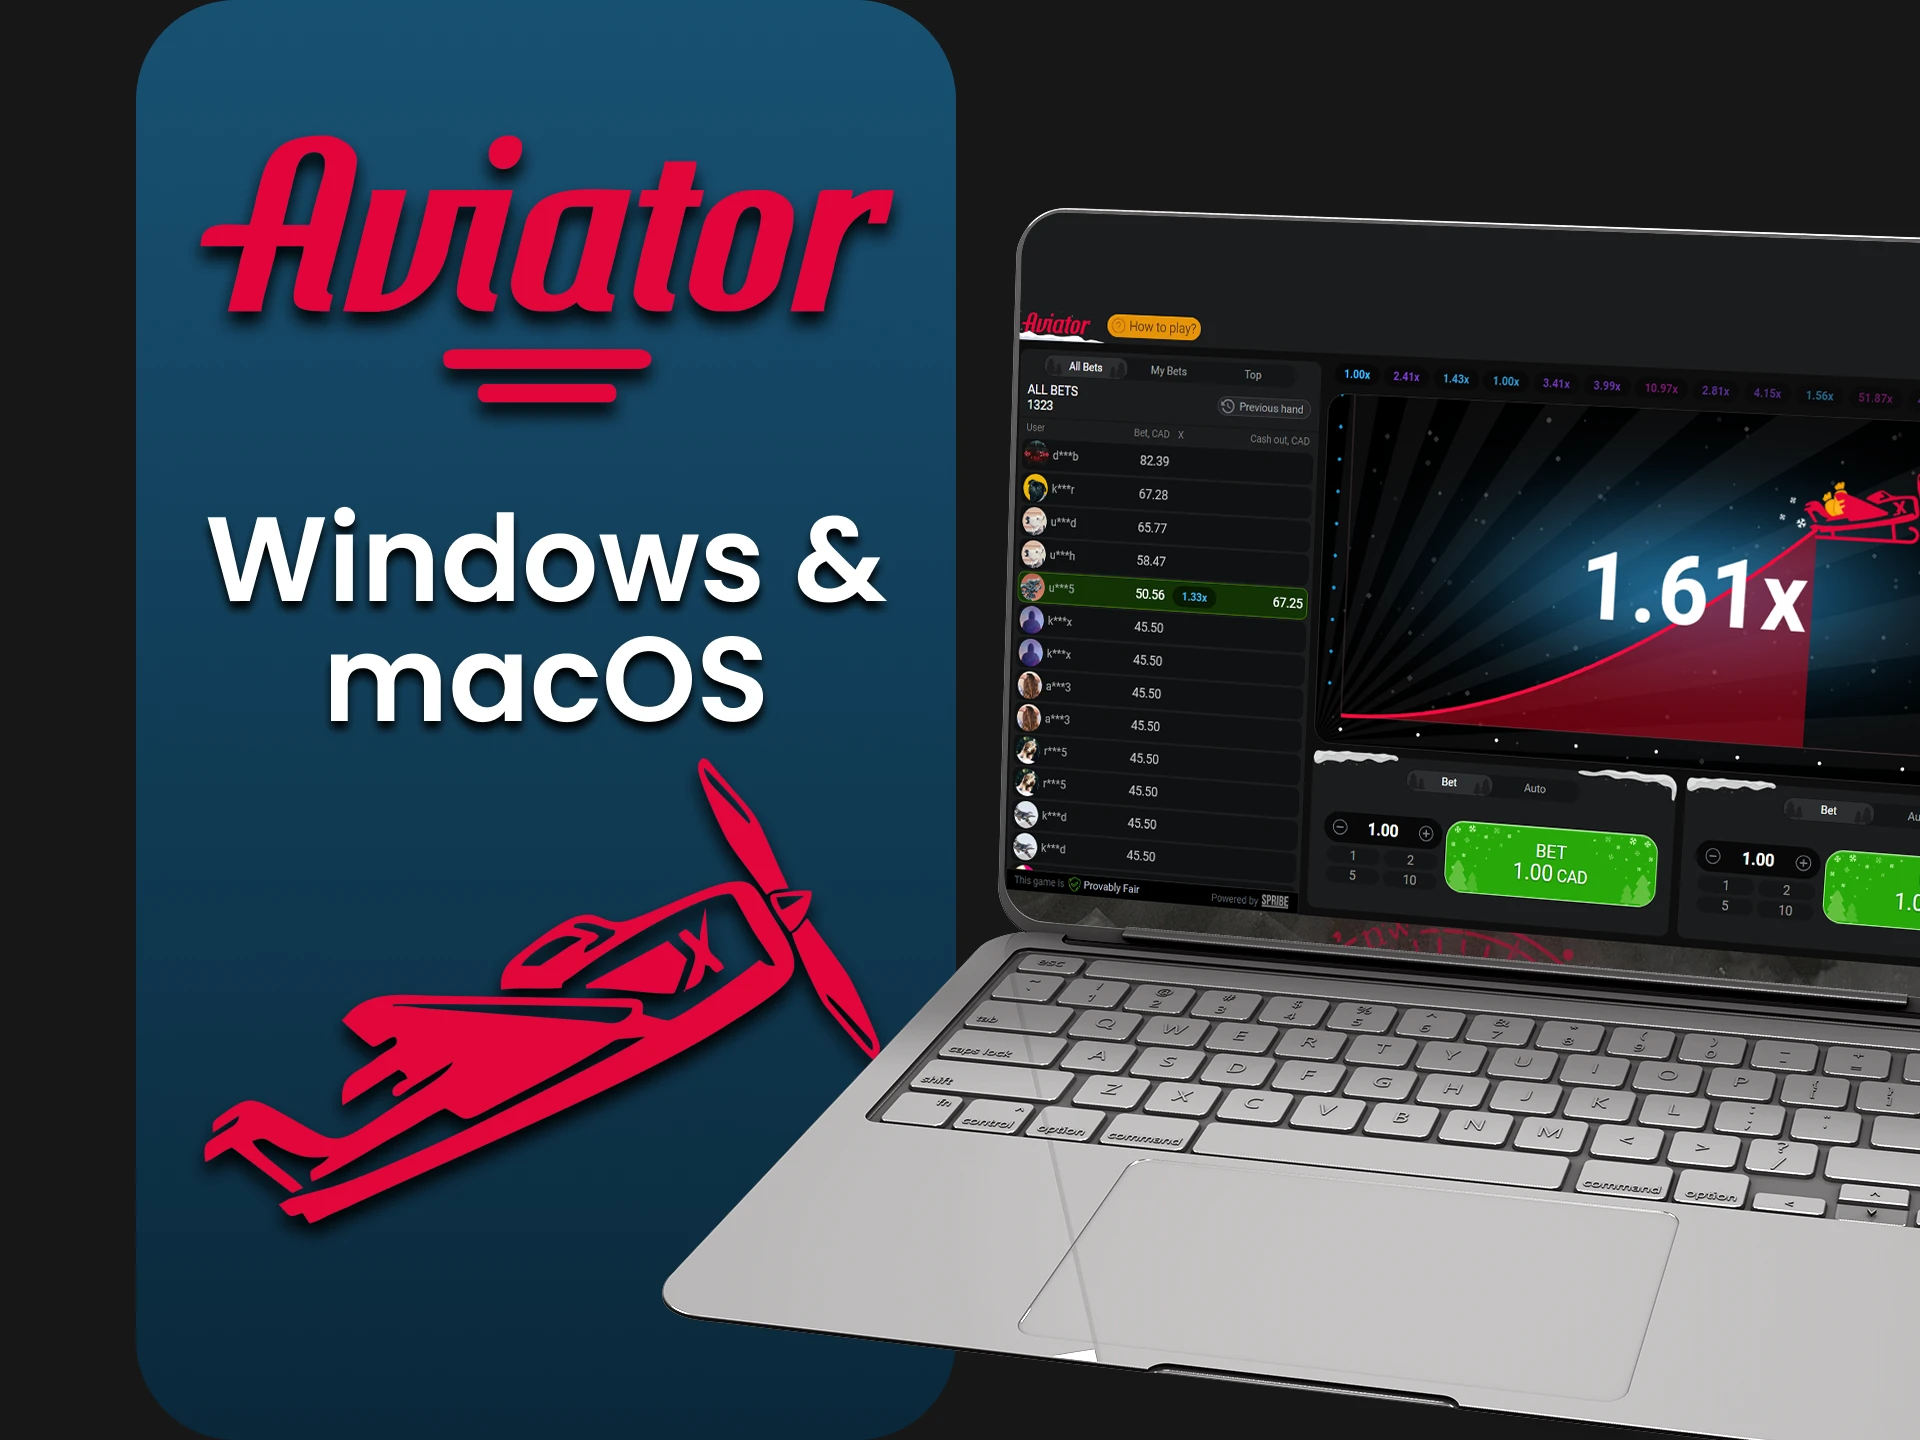 Download the Aviator application for Windows and macOS.